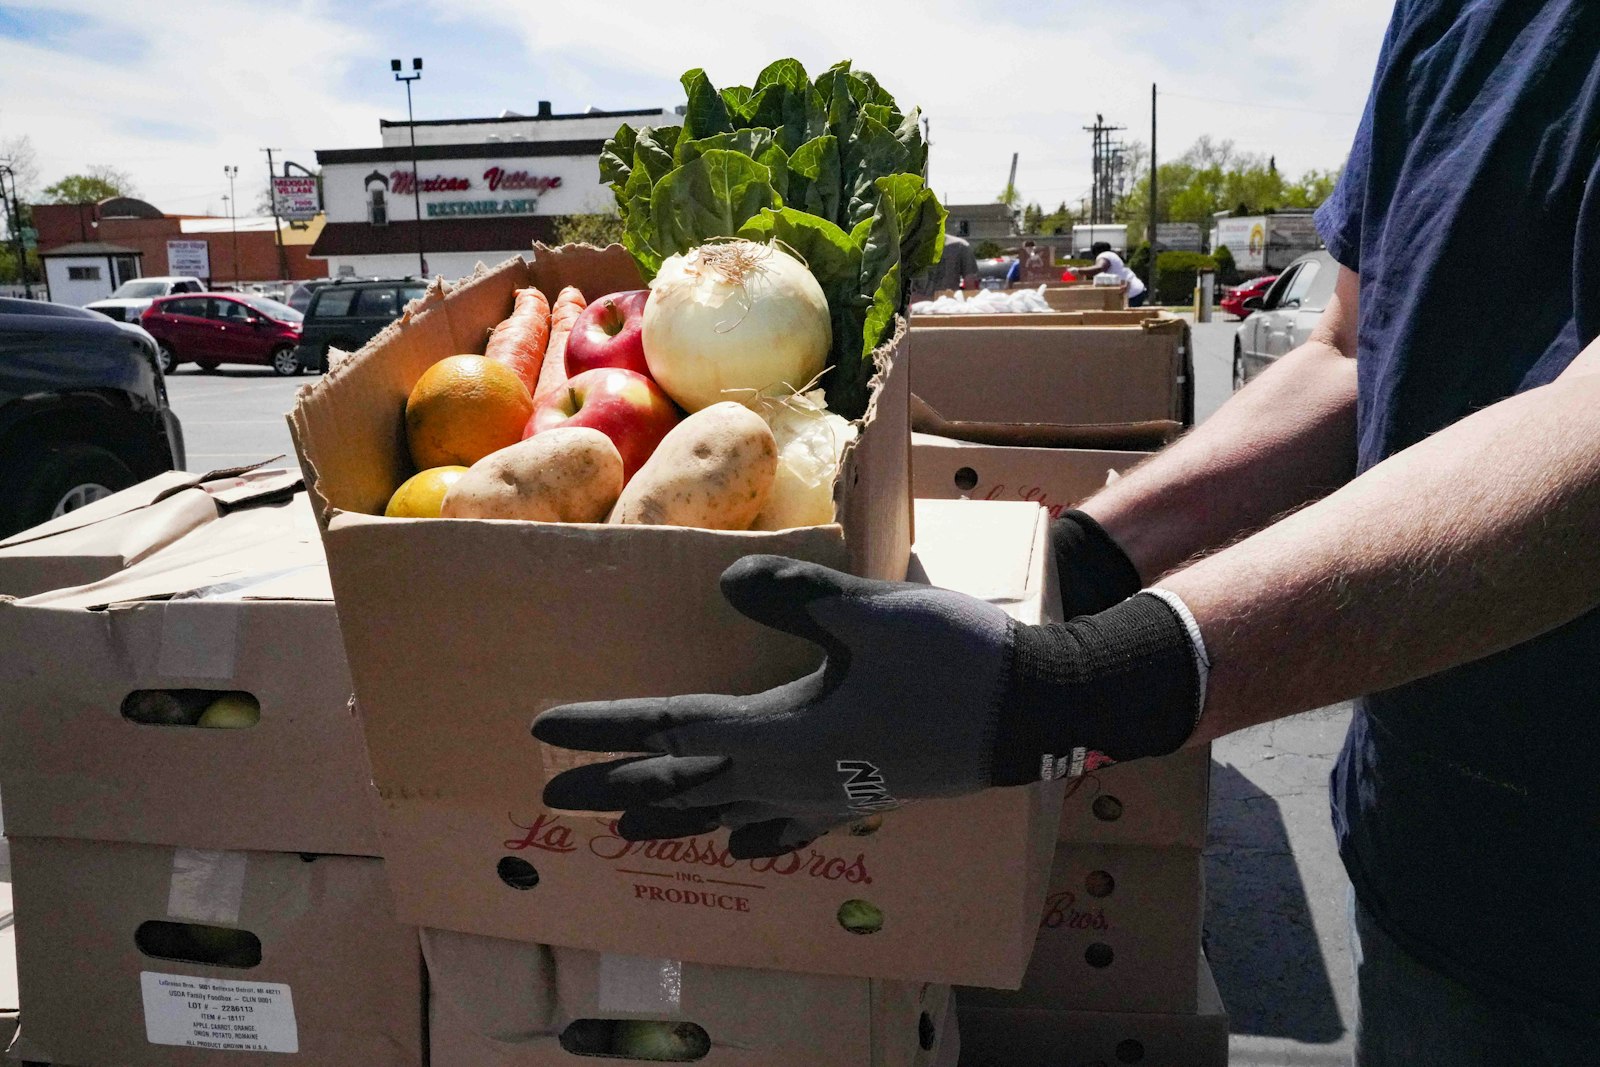 A volunteer carries a box of produce for distribution at the Roberto Clemente Learning Center in Detroit. (Courtesy of Gleaners Community Food Bank)